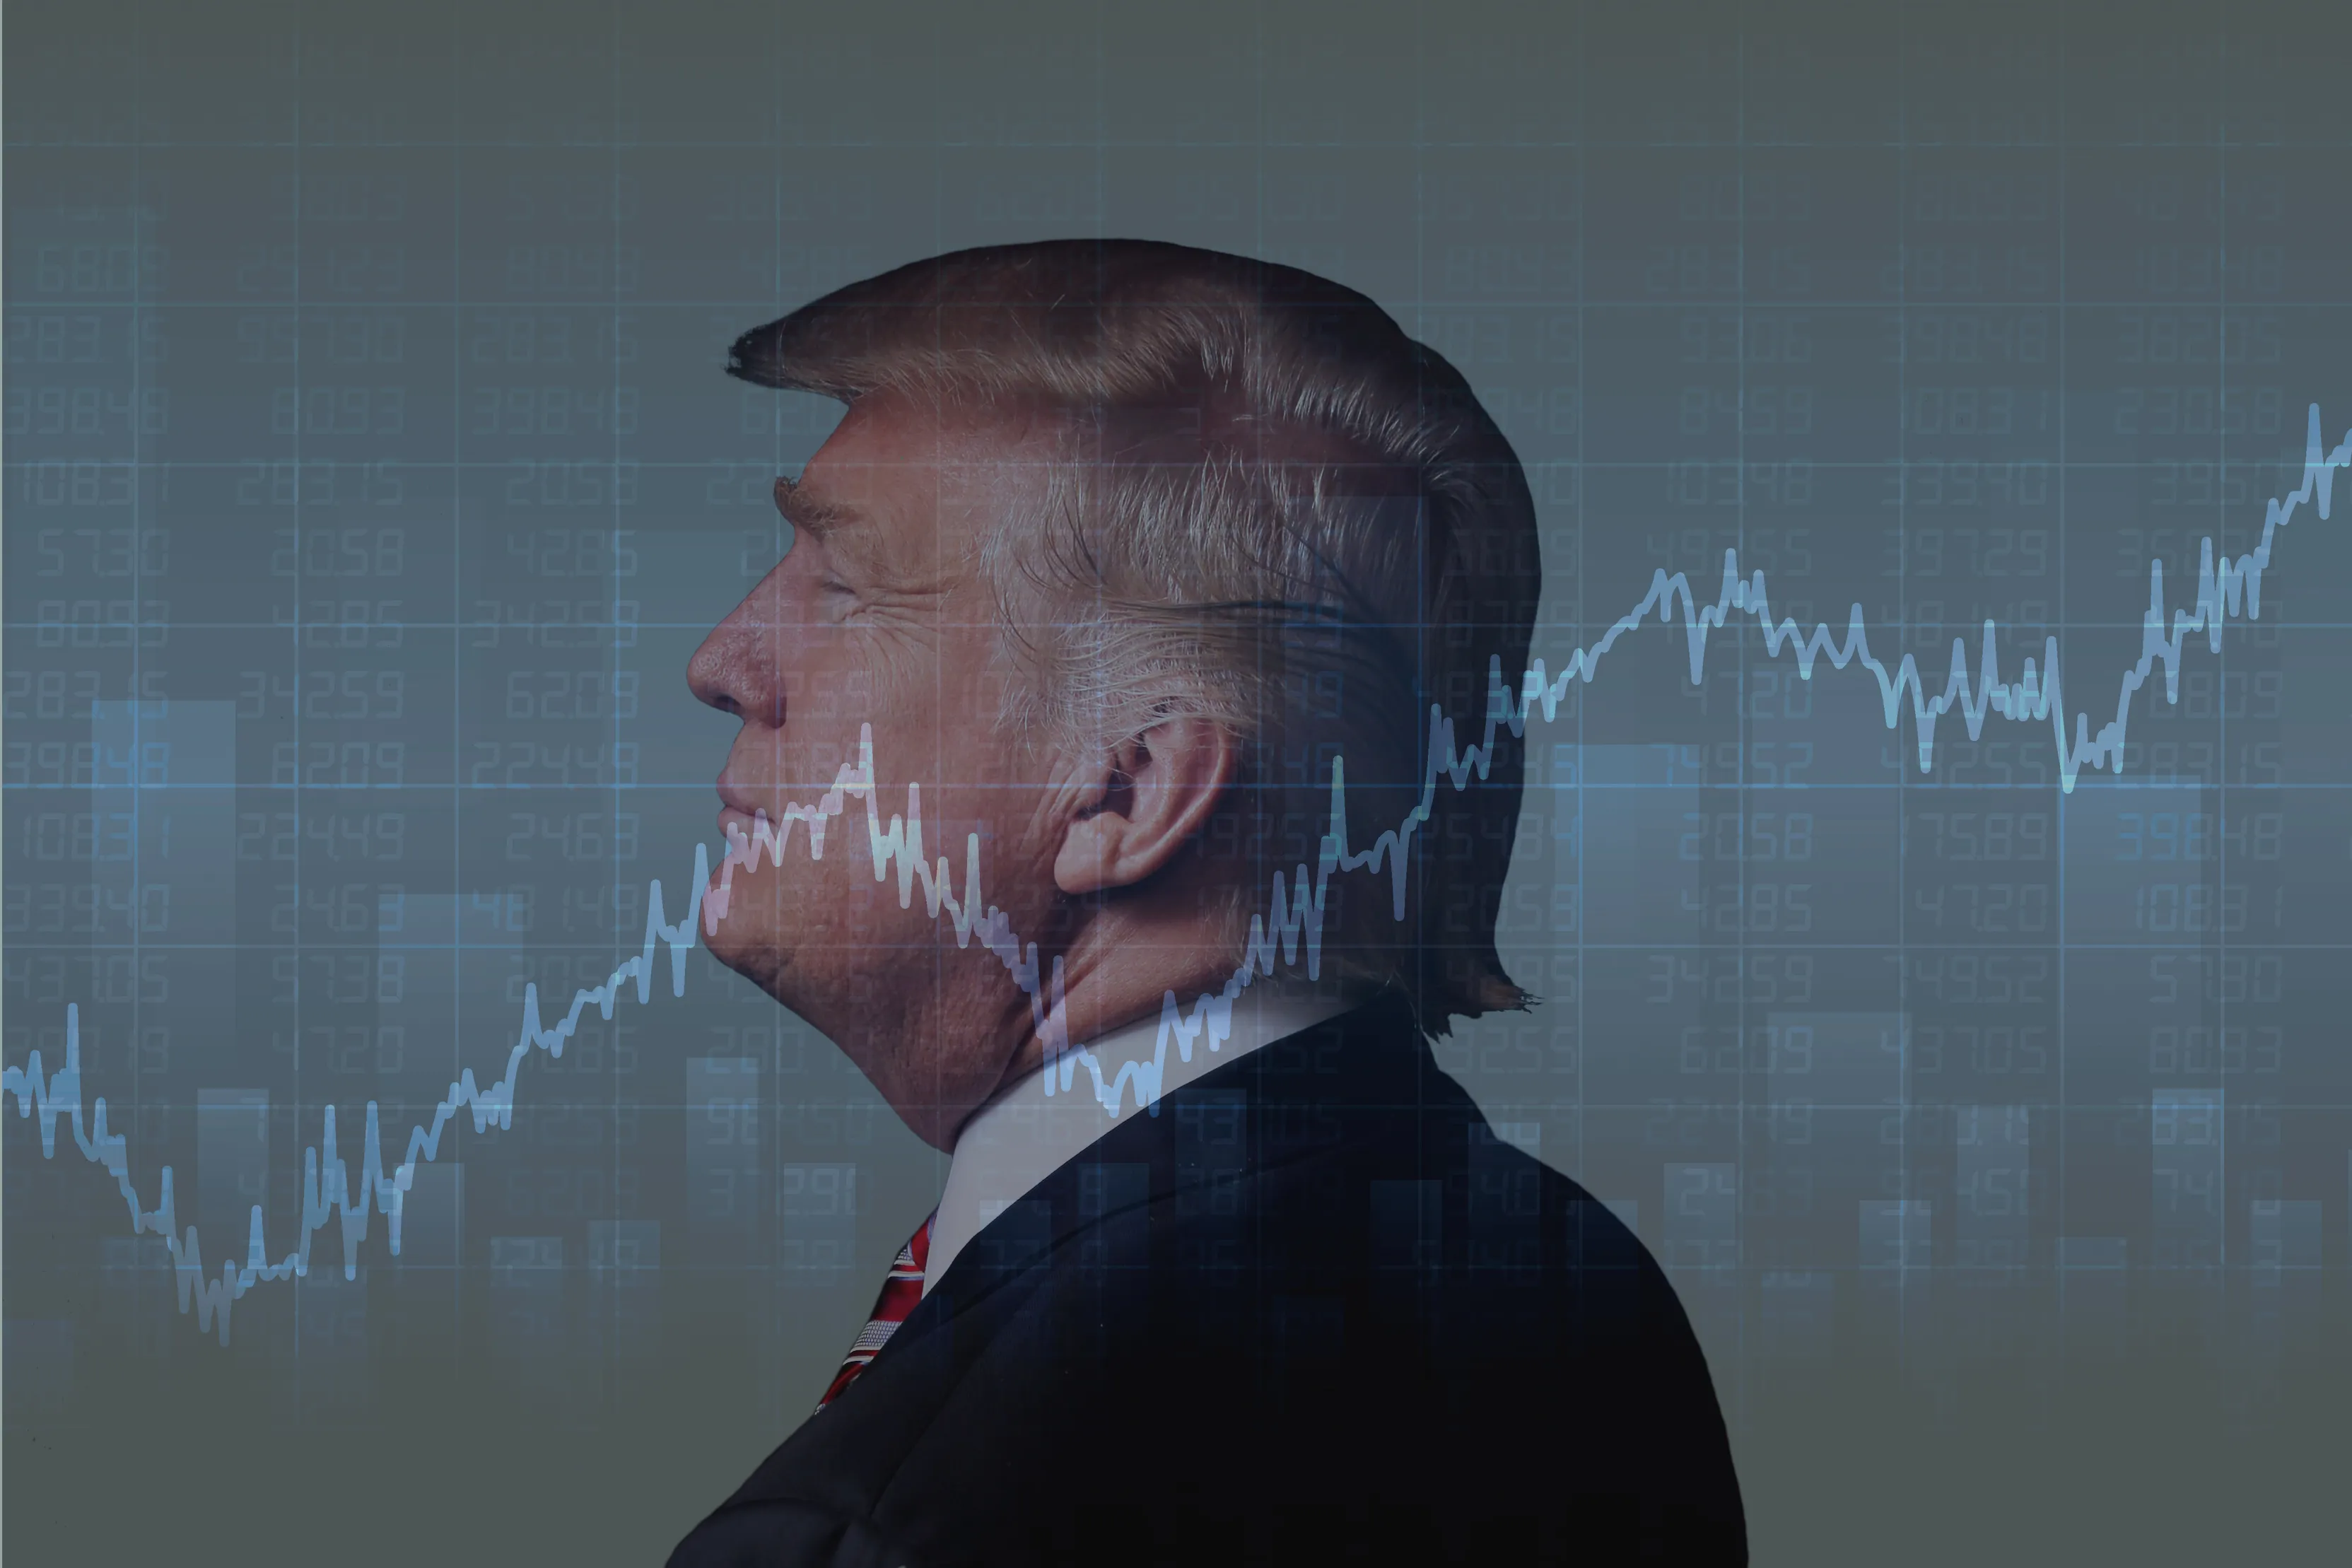 This Chart Shows How Trump's Stock Market Gains Compare to the Last 13 Presidents